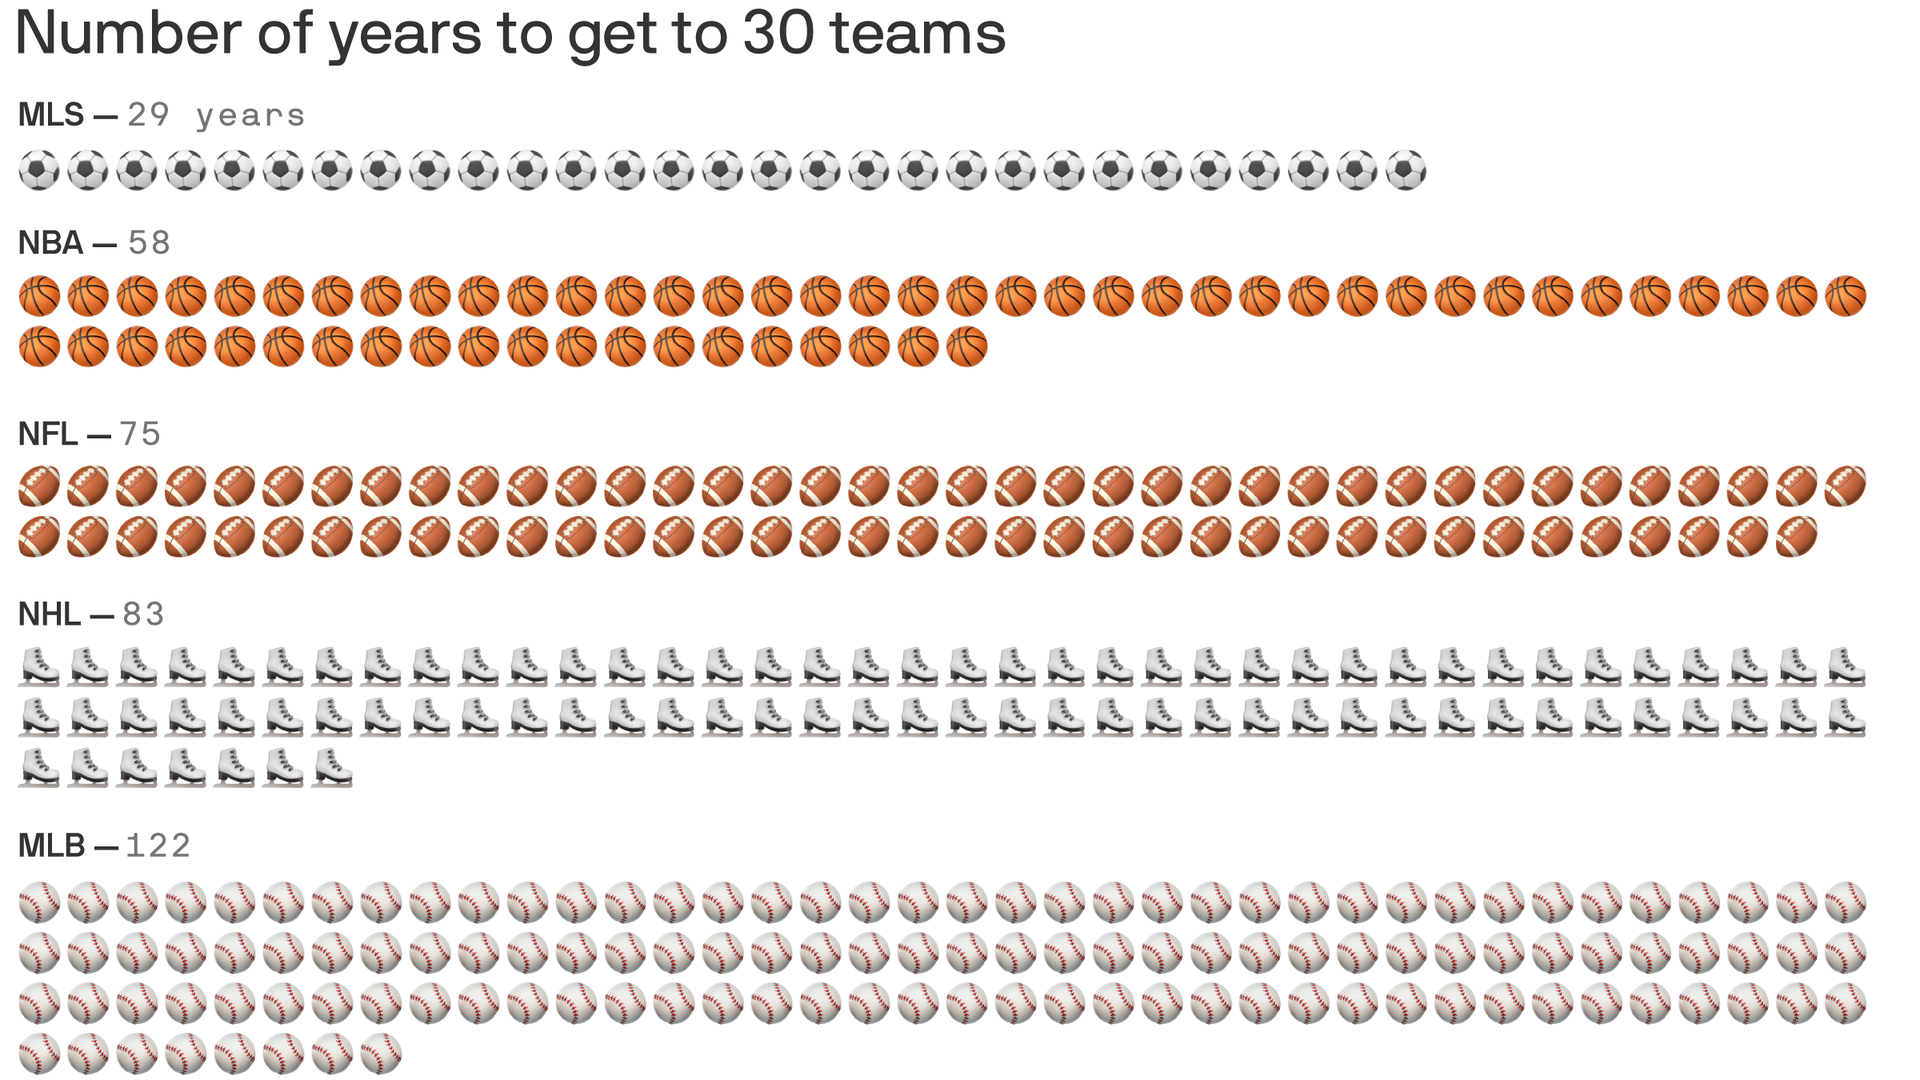 A pictogram detailing how many years it took a league to get to 30 teams. MLS only took 29 years, half as much as the 2nd shortest, the NBA. MLB took the longest, with 122 years.